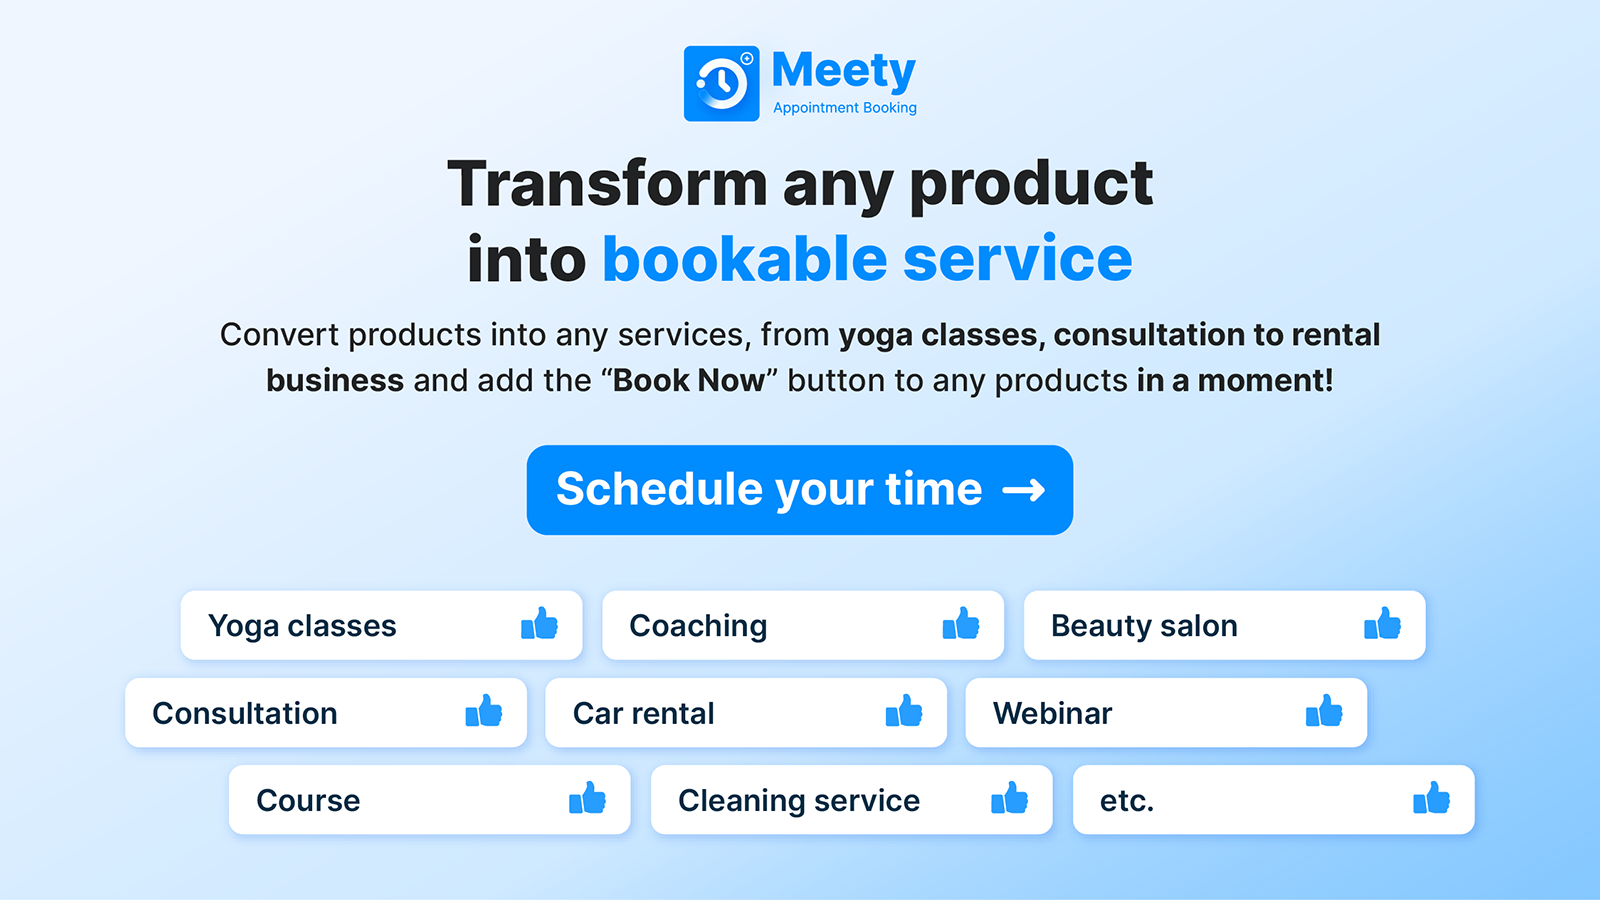 Transform any product into bookable service